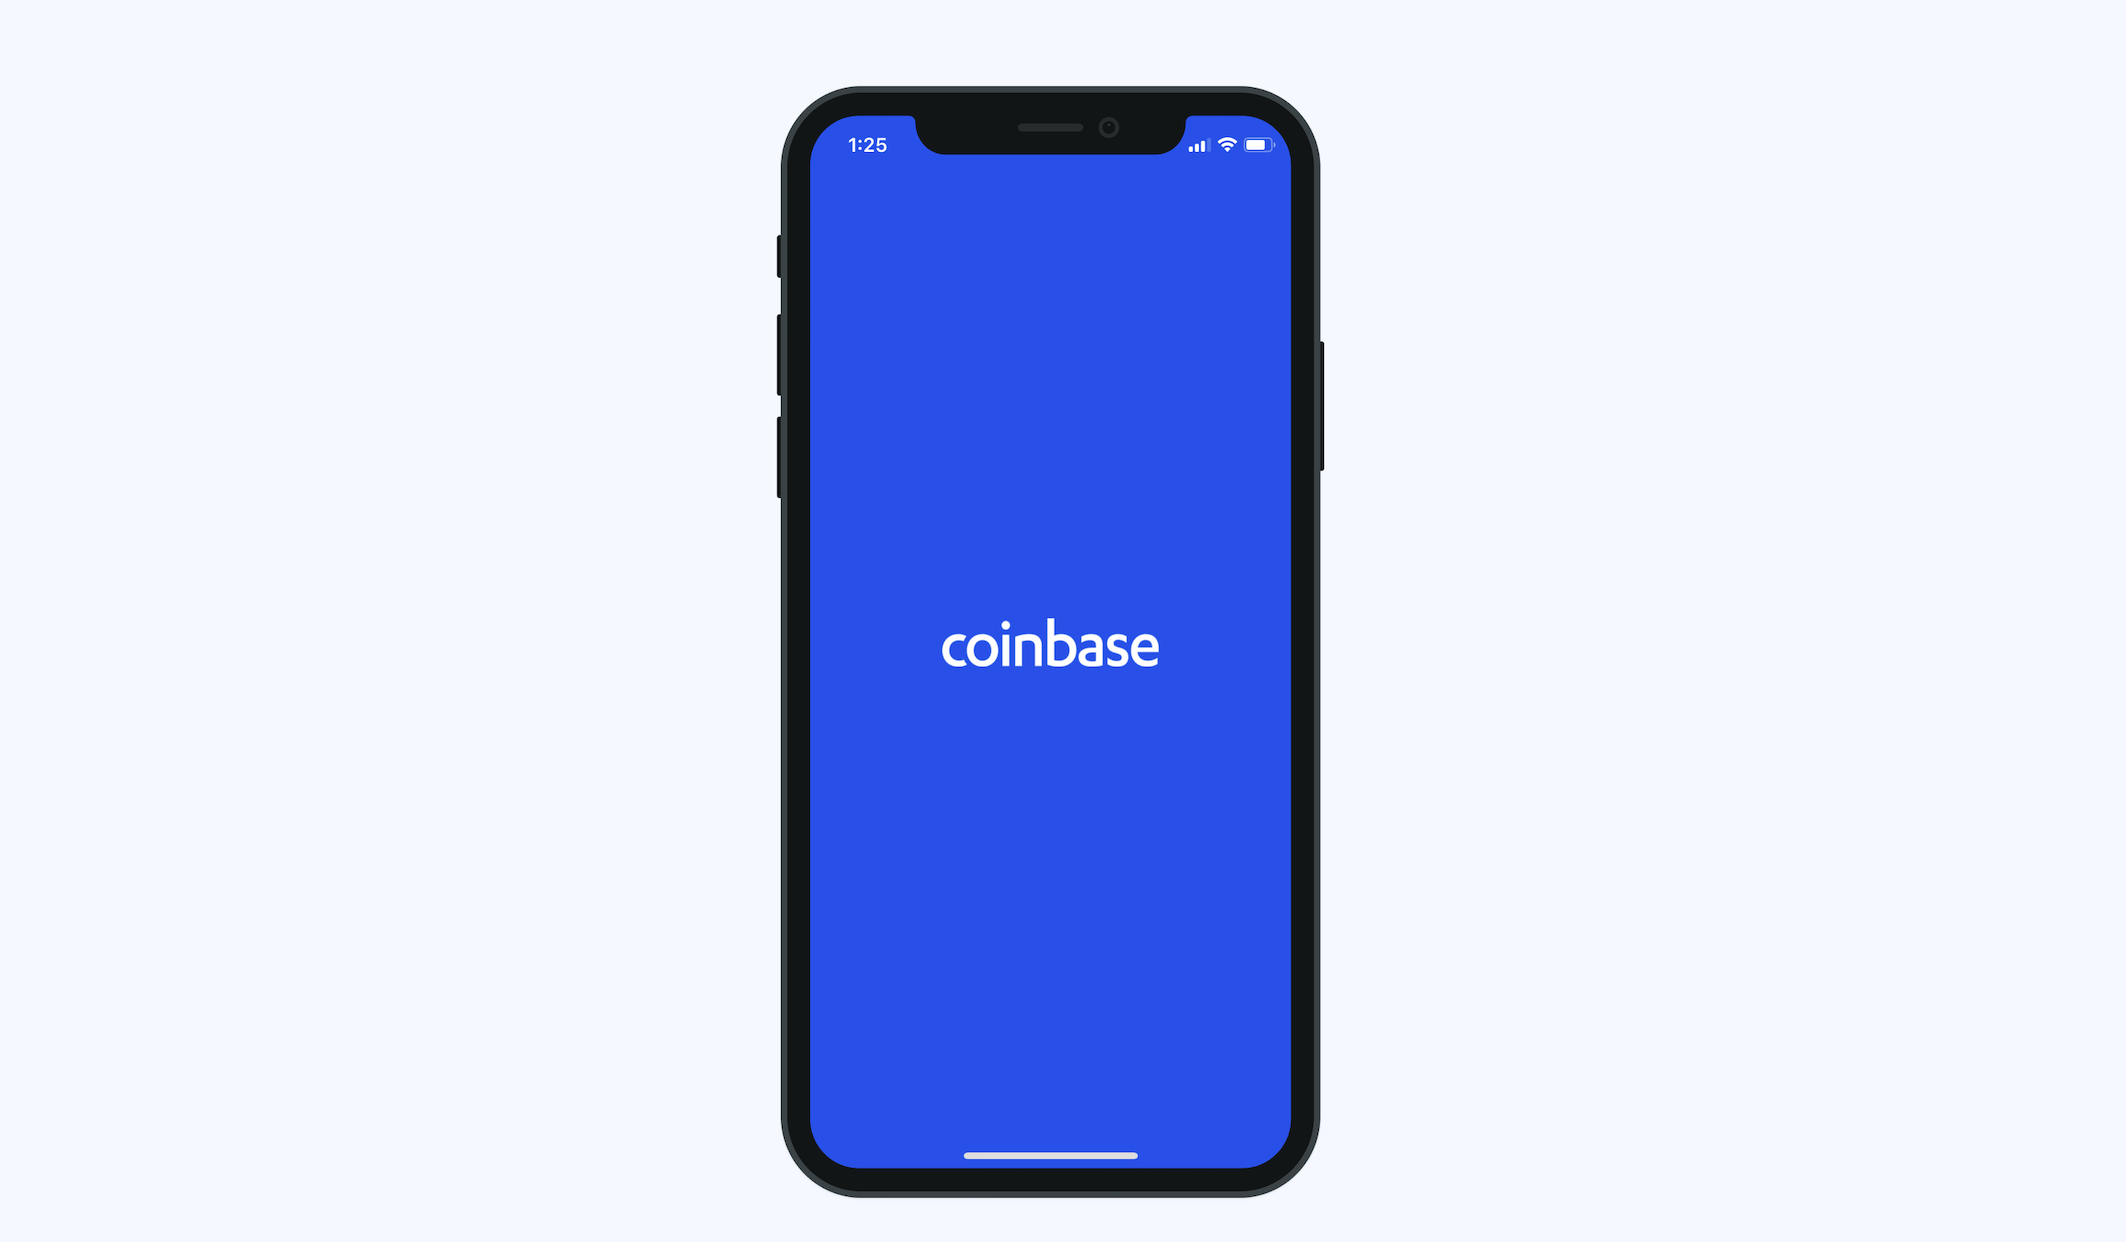 Coinbase Q3 Misses Street Estimate: 'Company Focused On Long-Term Growth, Not Being A Quarter-To-Quarter Investment'